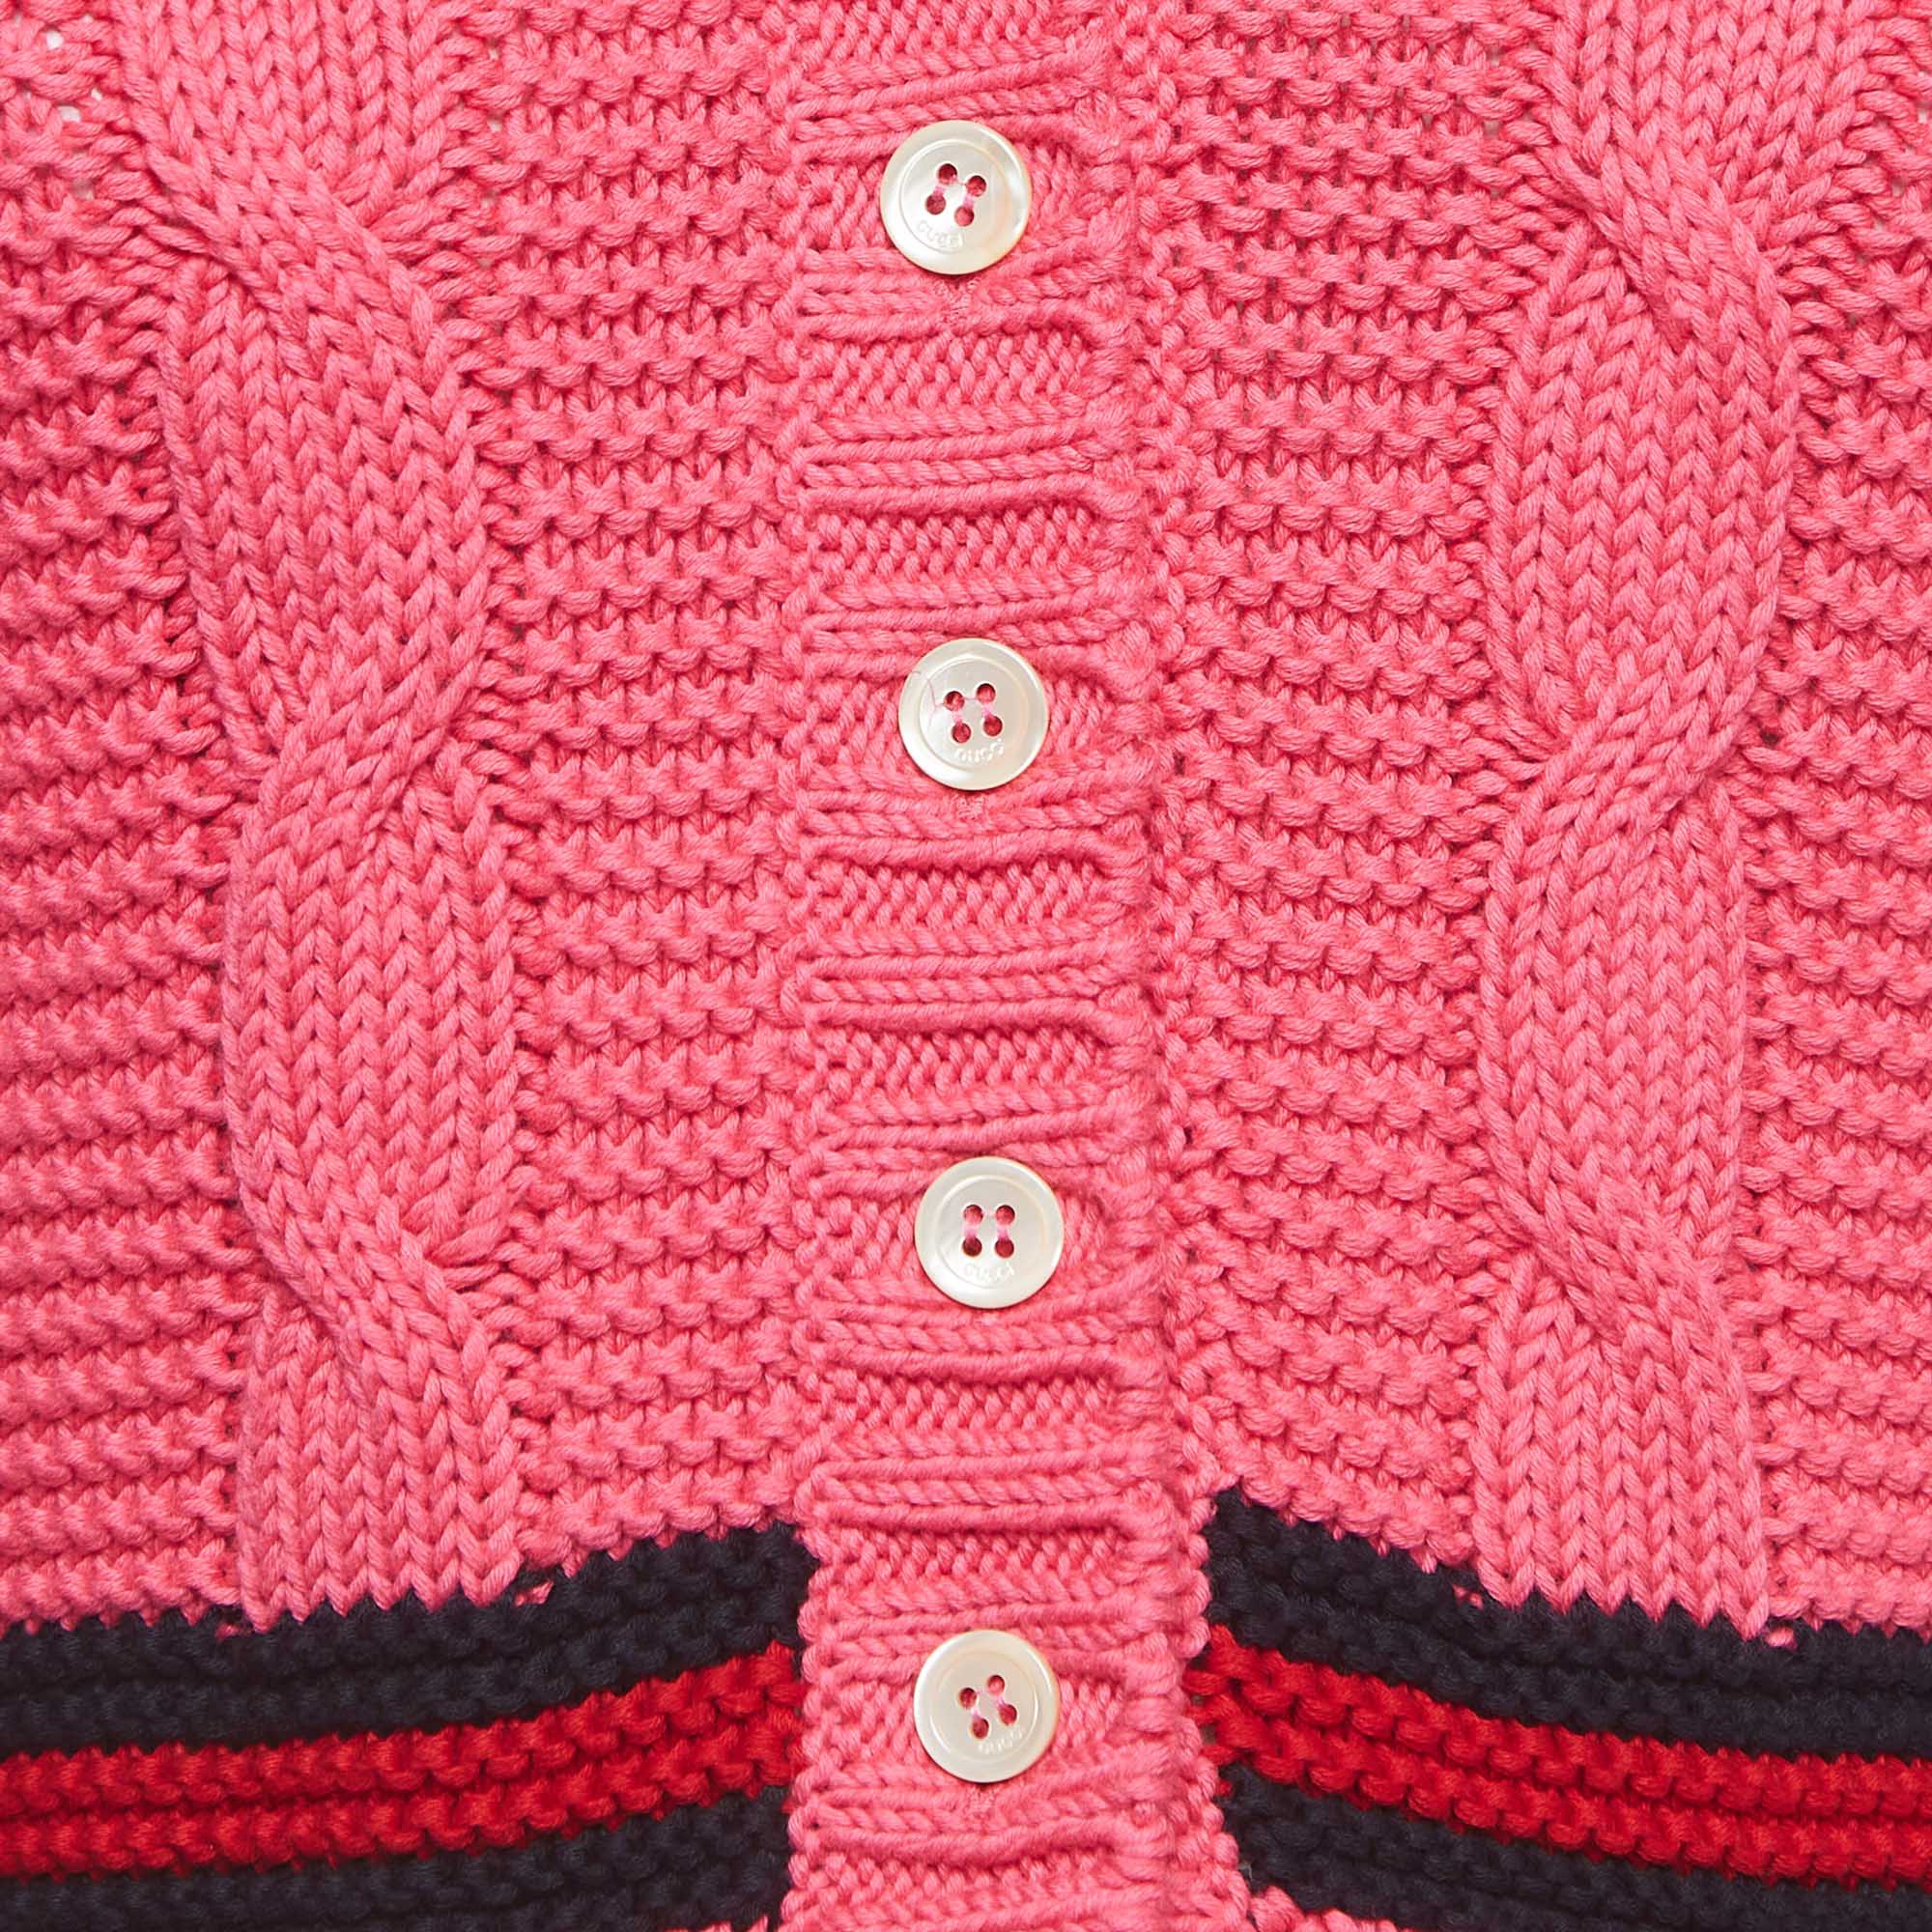 Gucci Pink Cable Knit Buttoned Cardigan (8 Yrs)